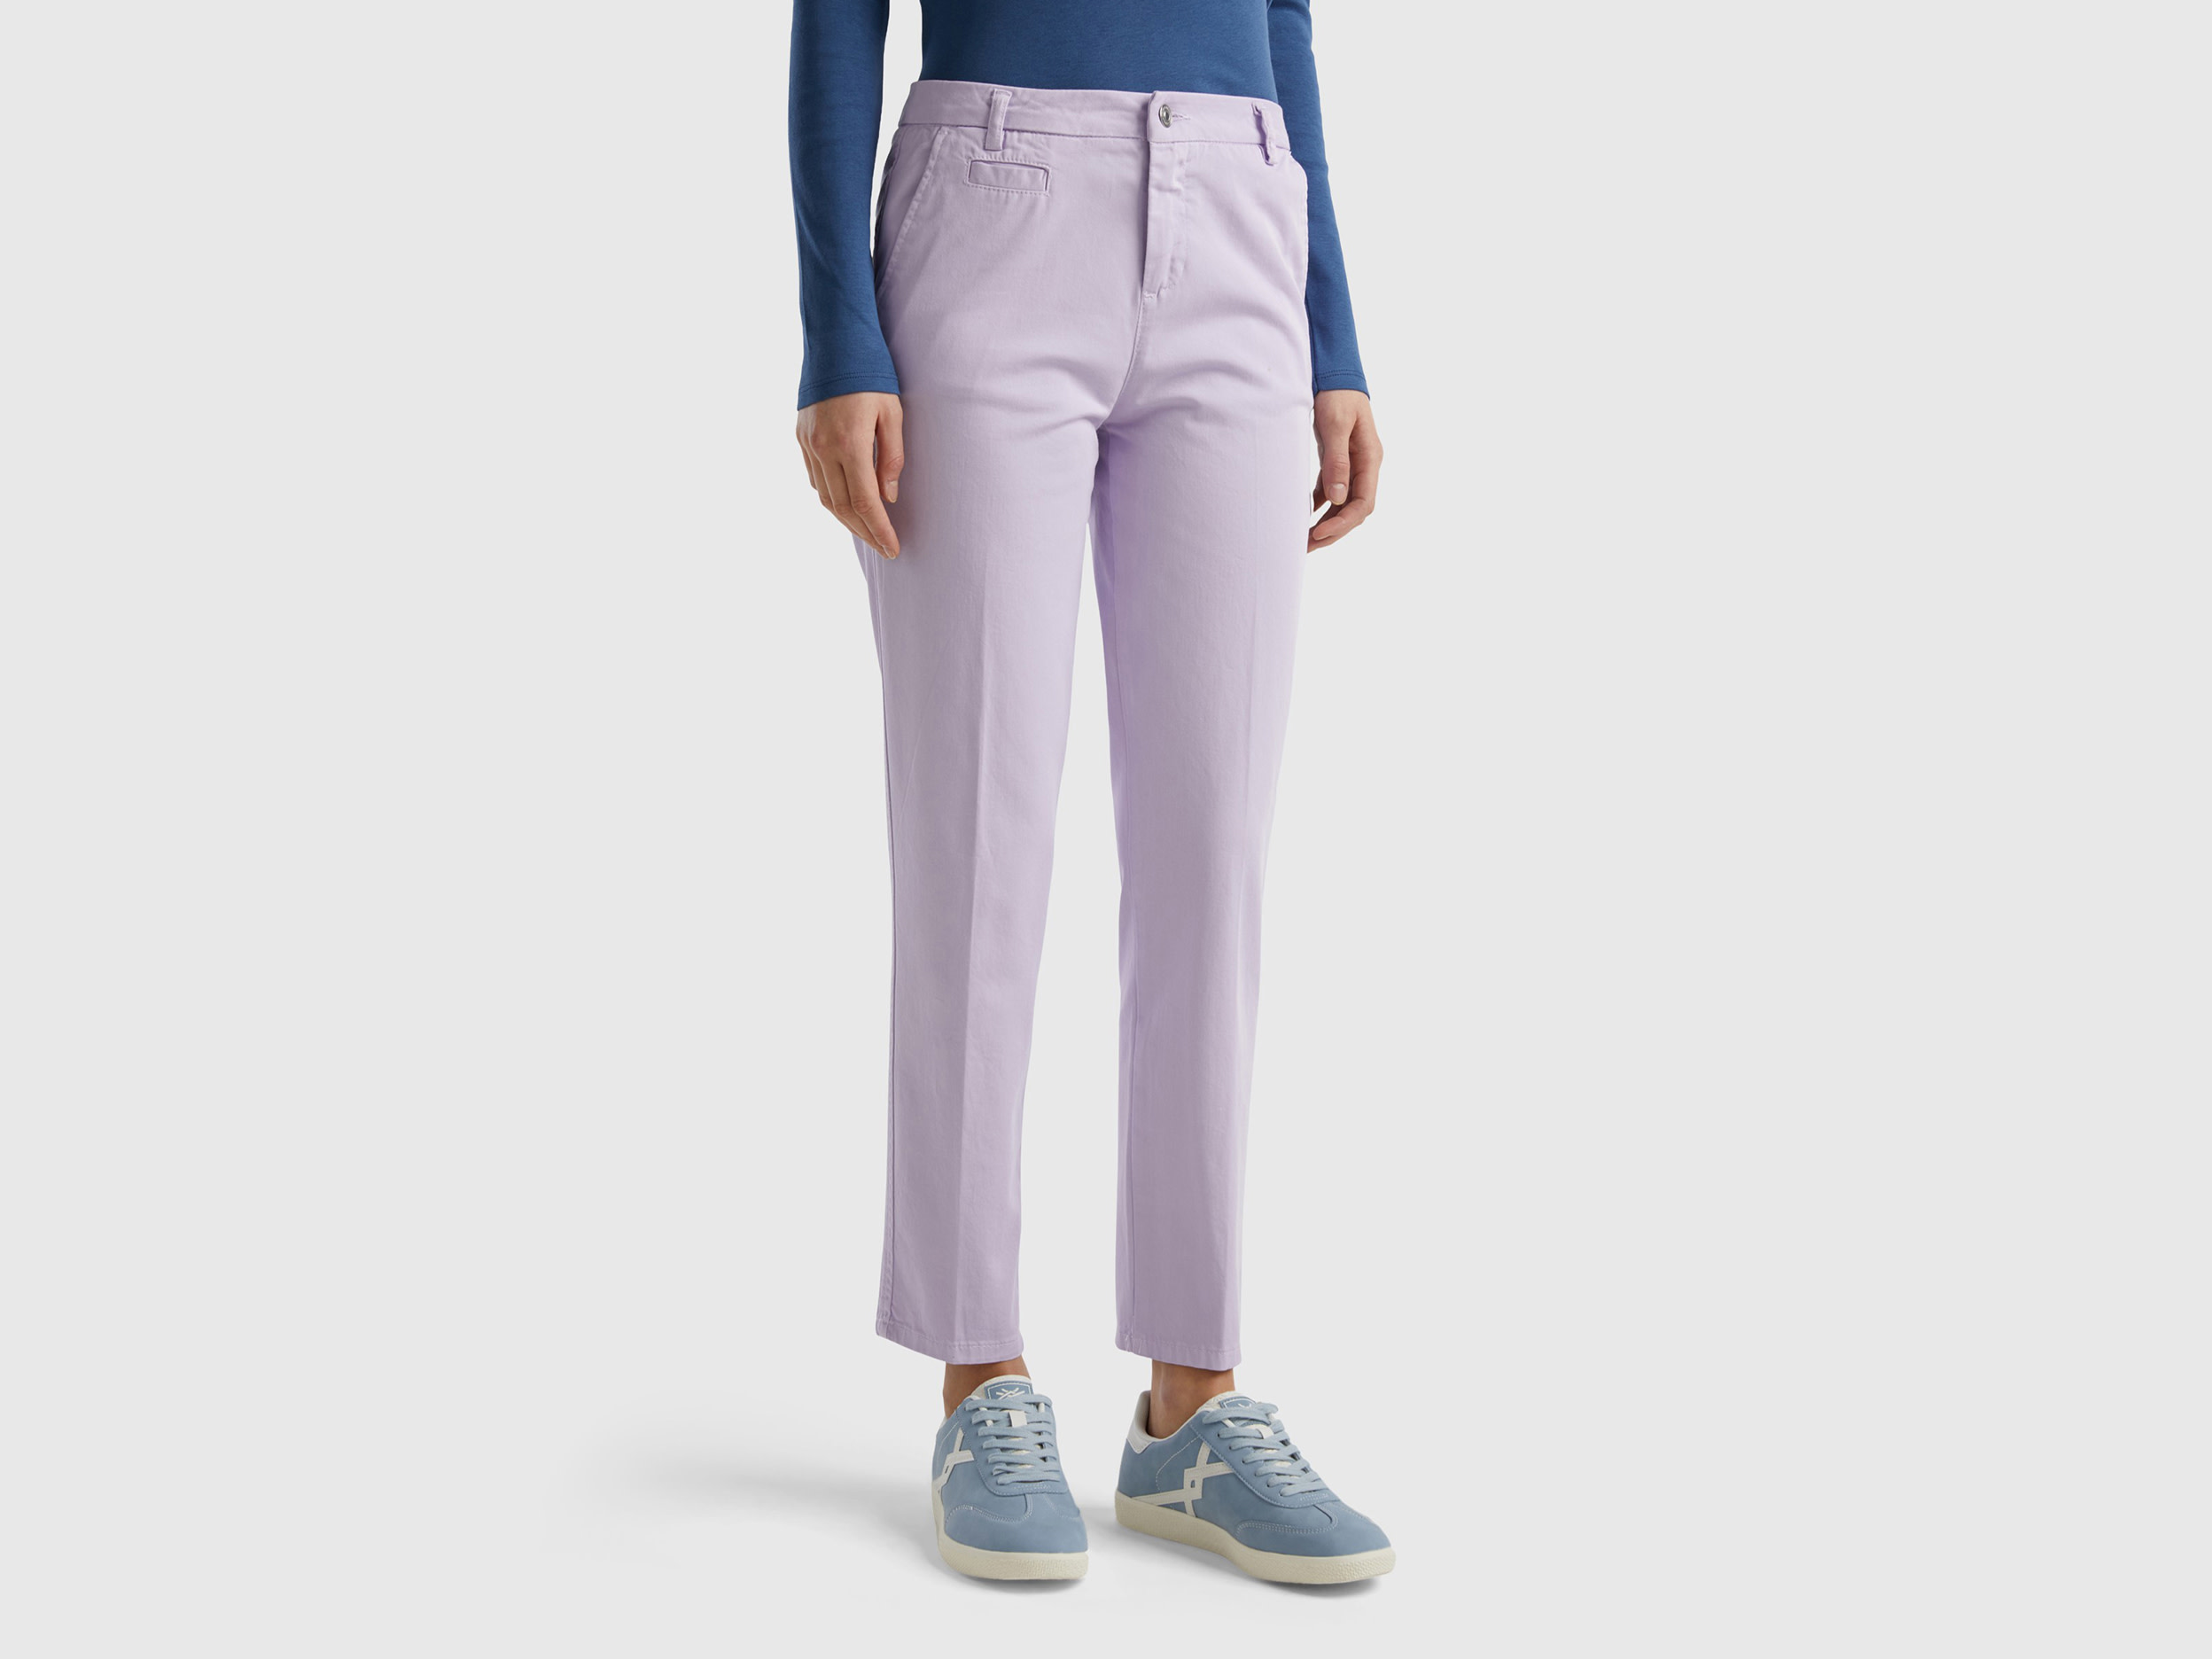 Benetton, Lilac Slim Fit Cotton Chinos, size , Lilac, Women